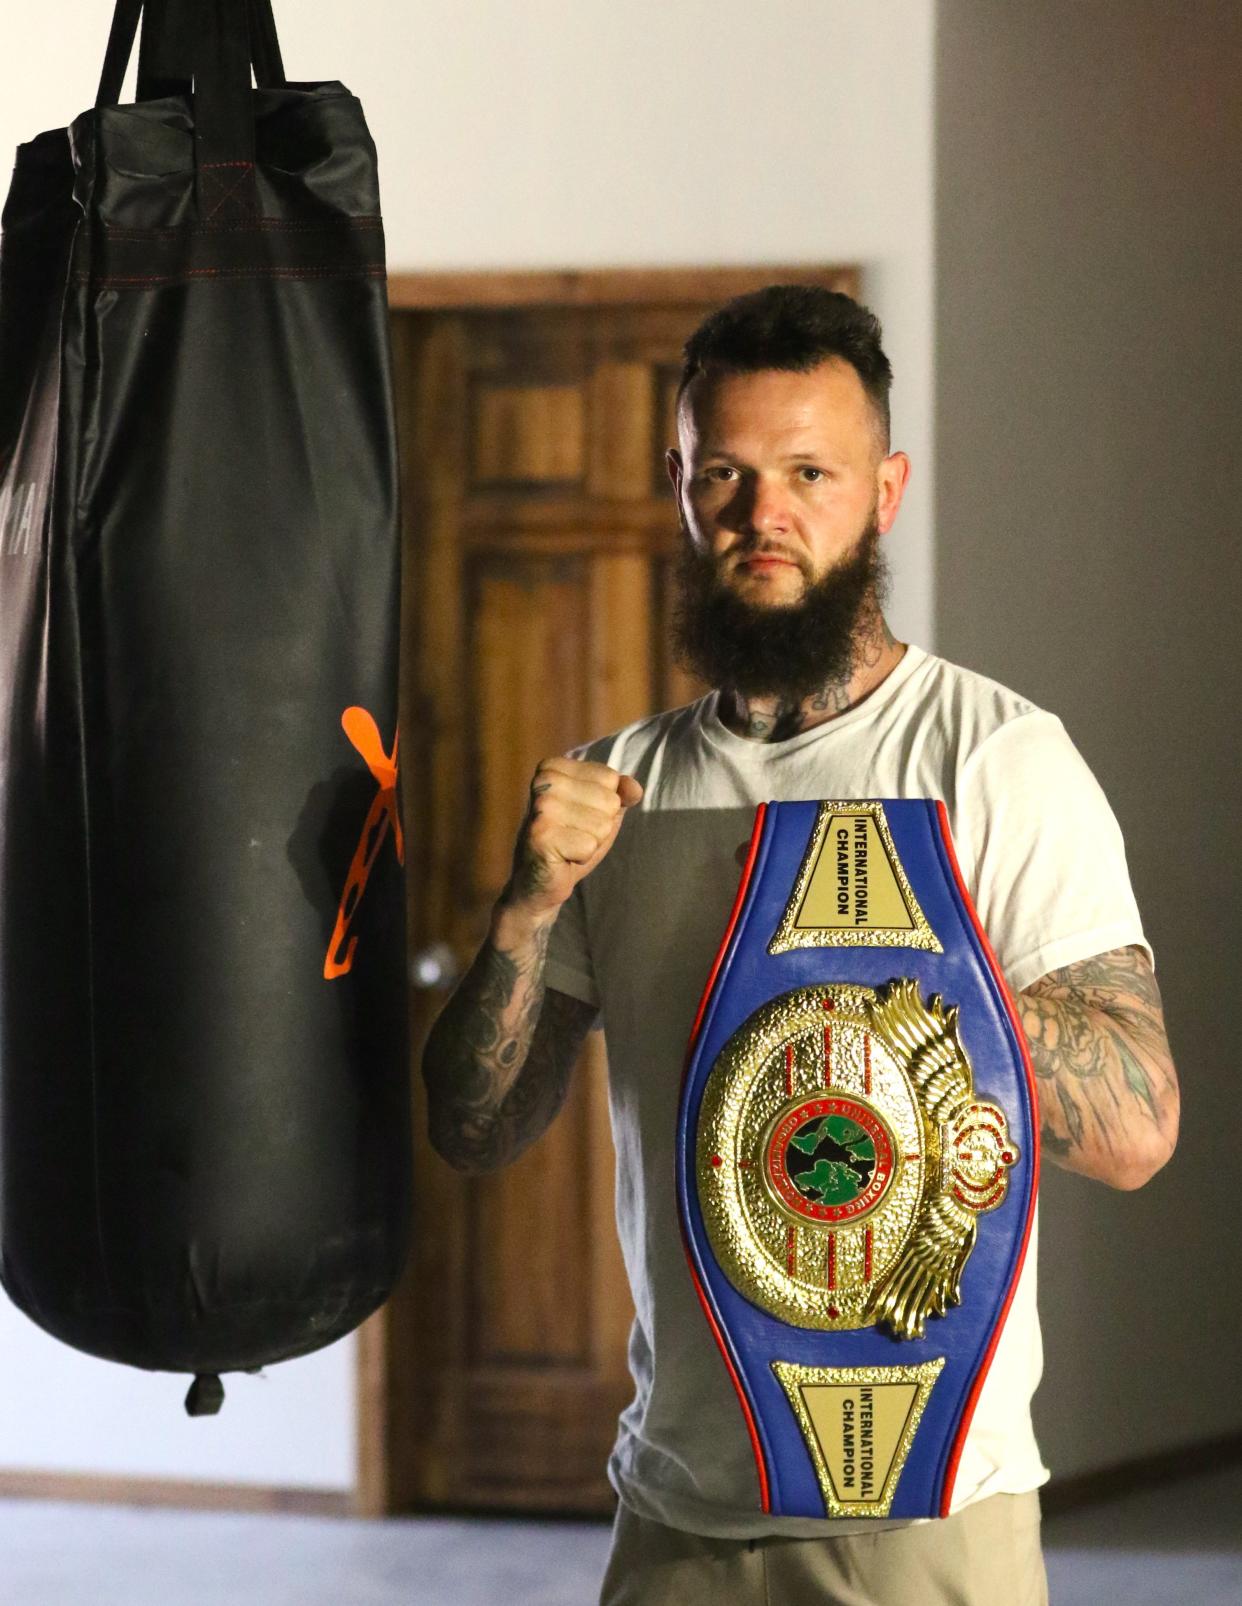 Brandon Alexander, the Zanesville native, recently won the vacant Universal Boxing Organization (UBO) International Middleweight title. He moved to 7-0 since turning pro in 2015 and is currently training for his next bout in June, where he will fight for the UBO Inter-Continental title in Colombia.